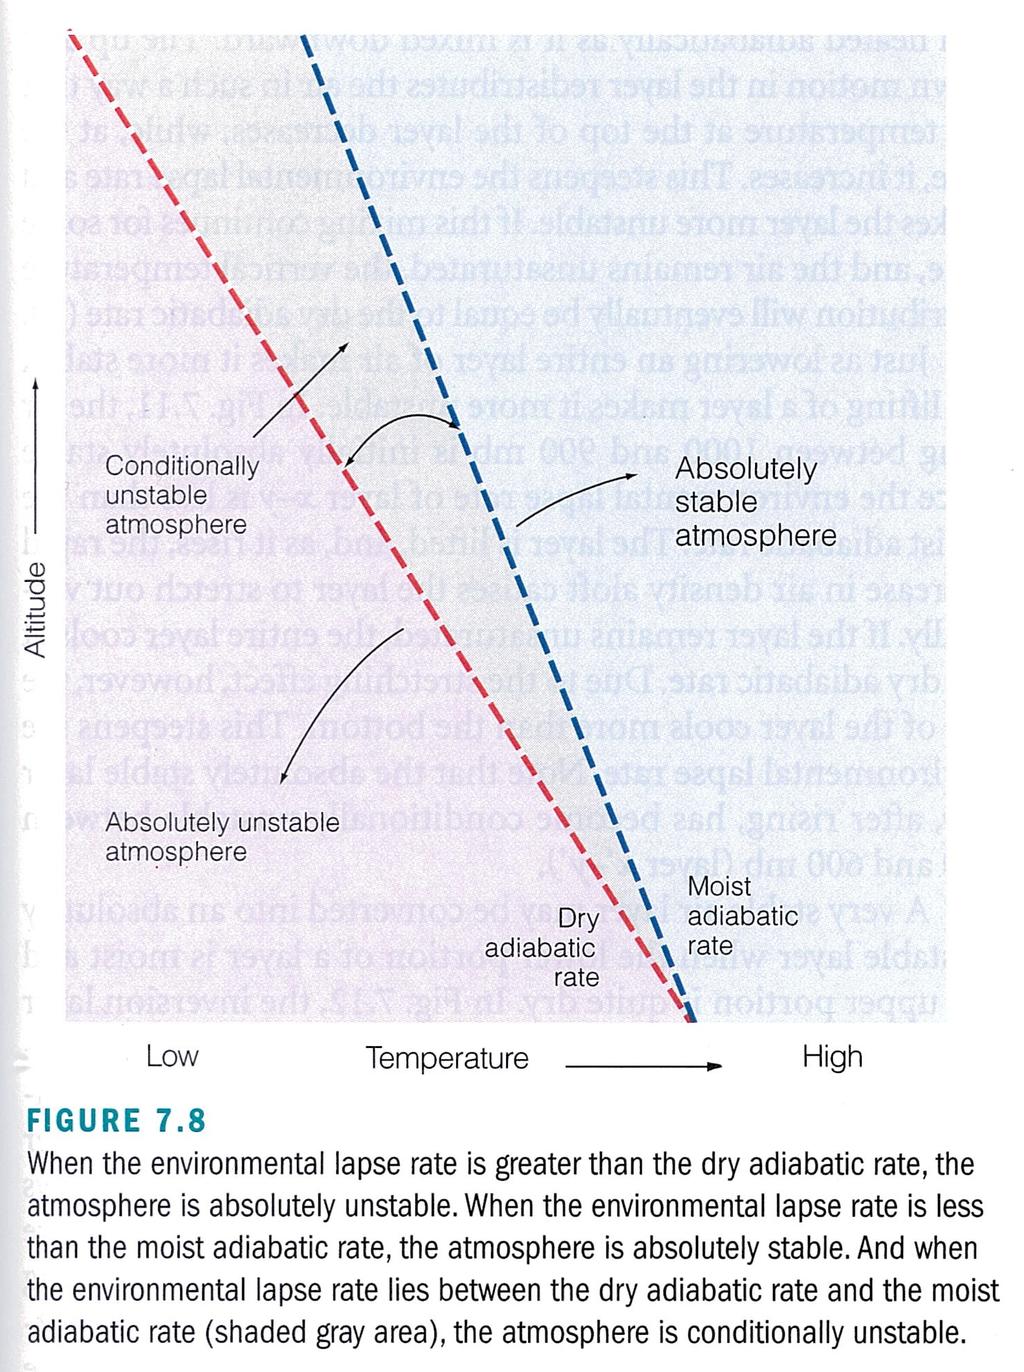 Atmospheric Stability On a Skew T Diagram to determine stability: need to compare the